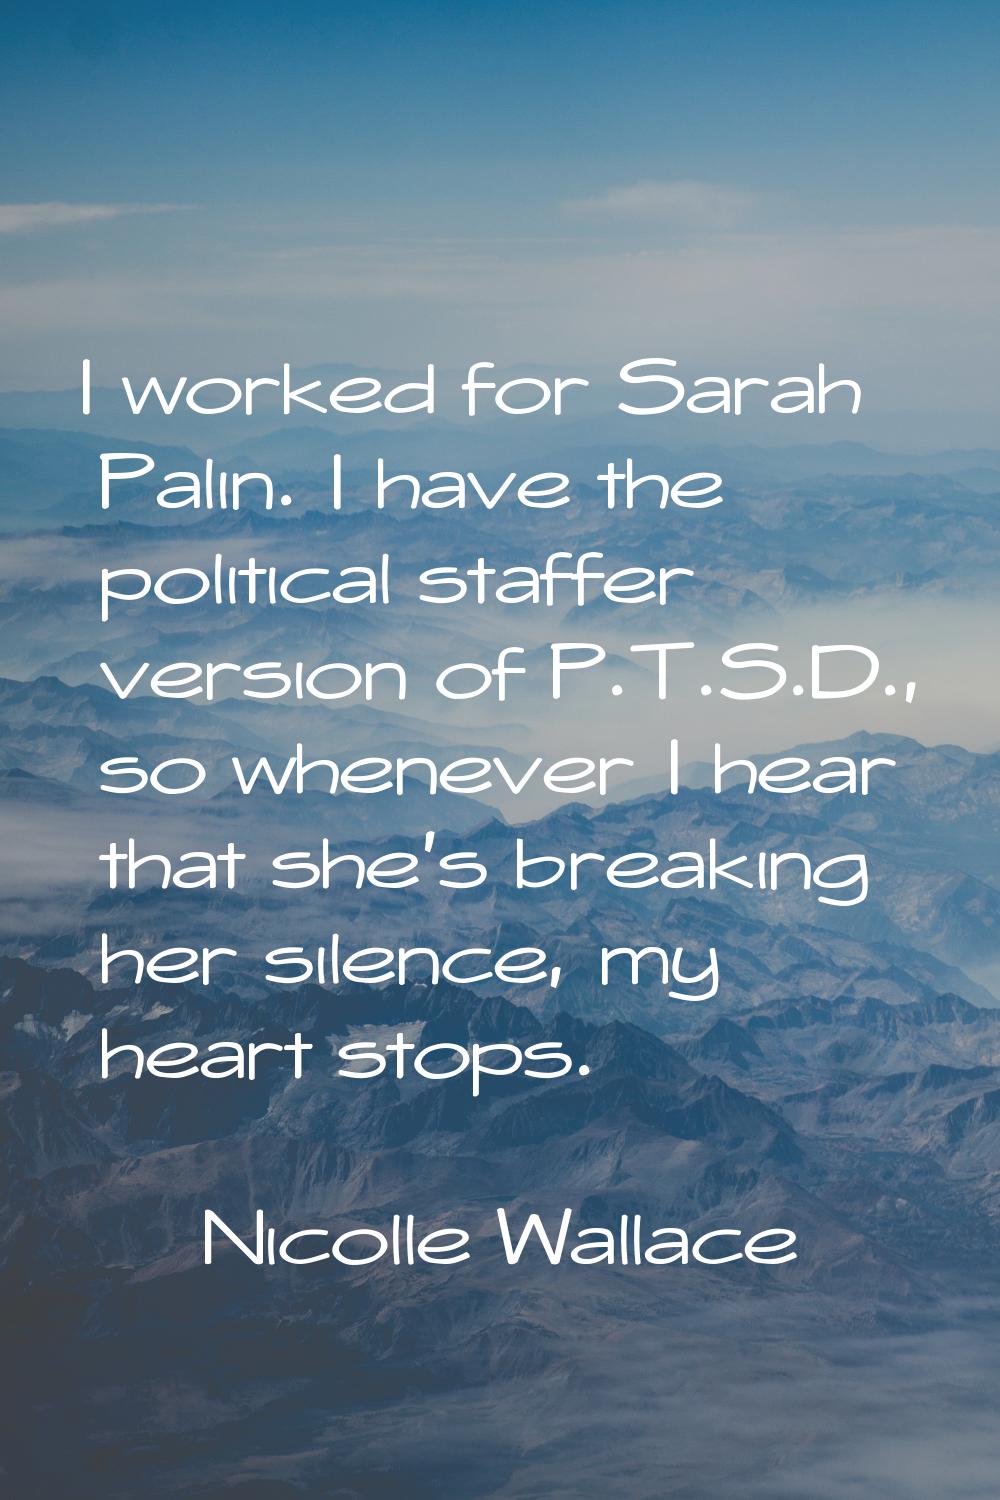 I worked for Sarah Palin. I have the political staffer version of P.T.S.D., so whenever I hear that